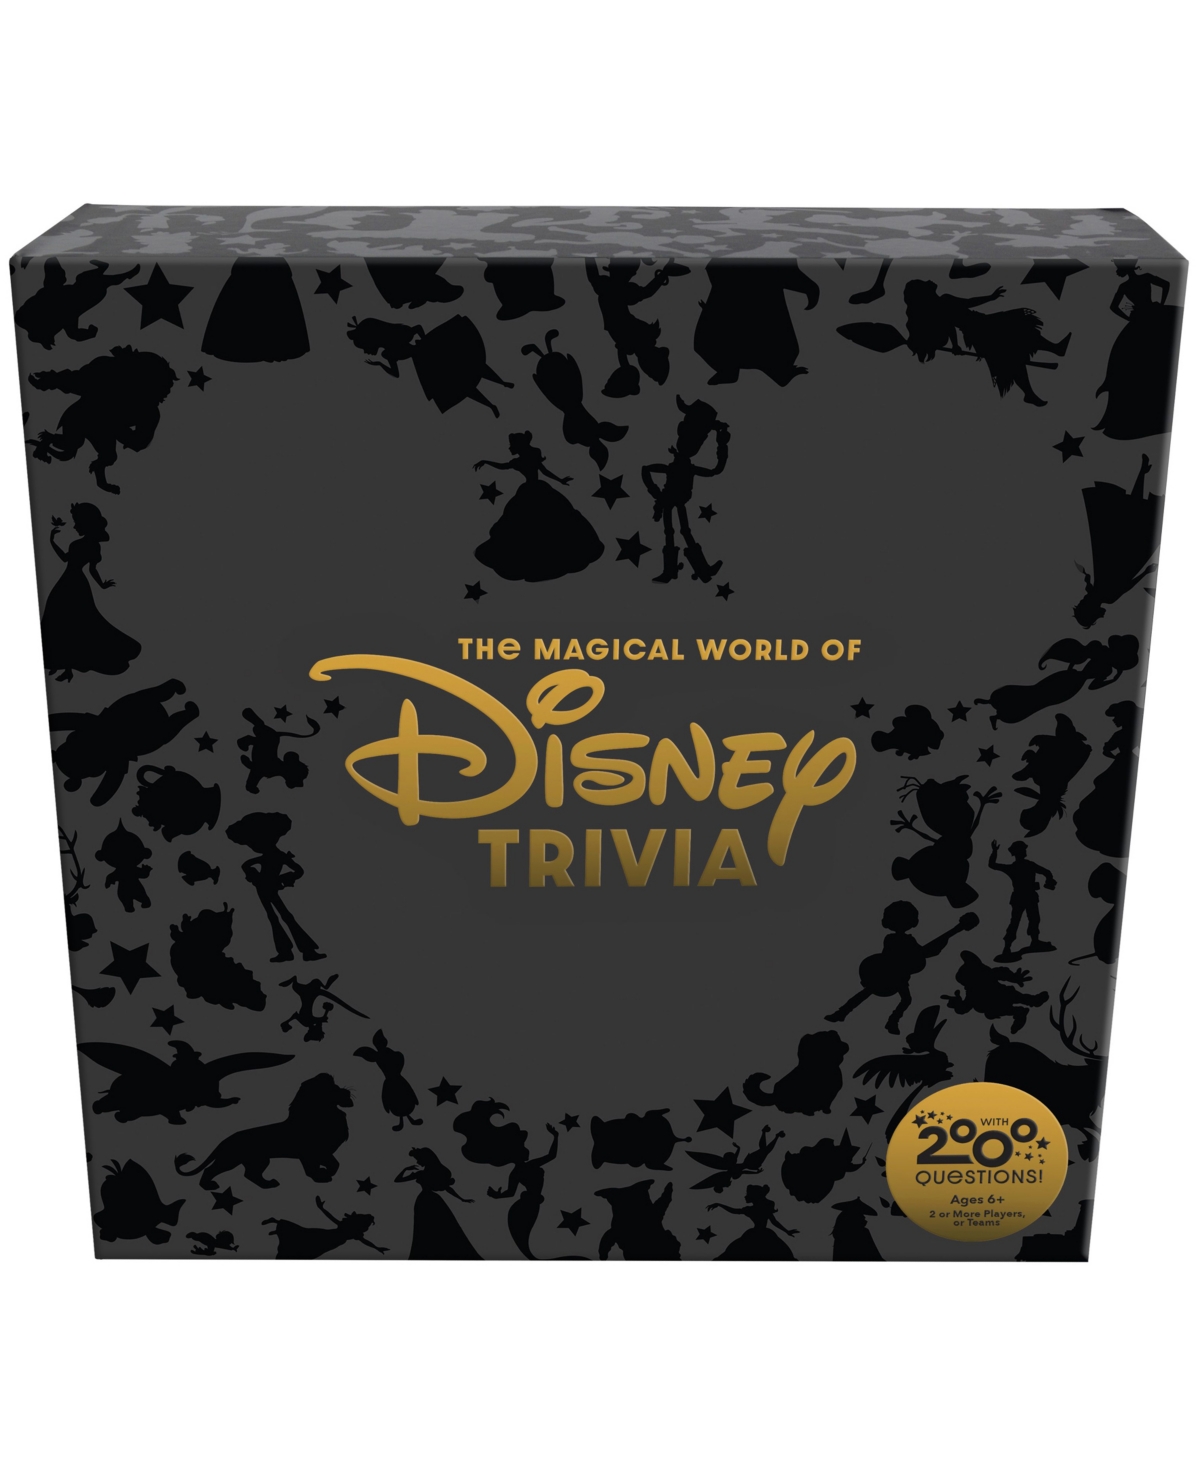 University Games Kids' Playmonster The Magical World Of Disney Trivia Game In No Color